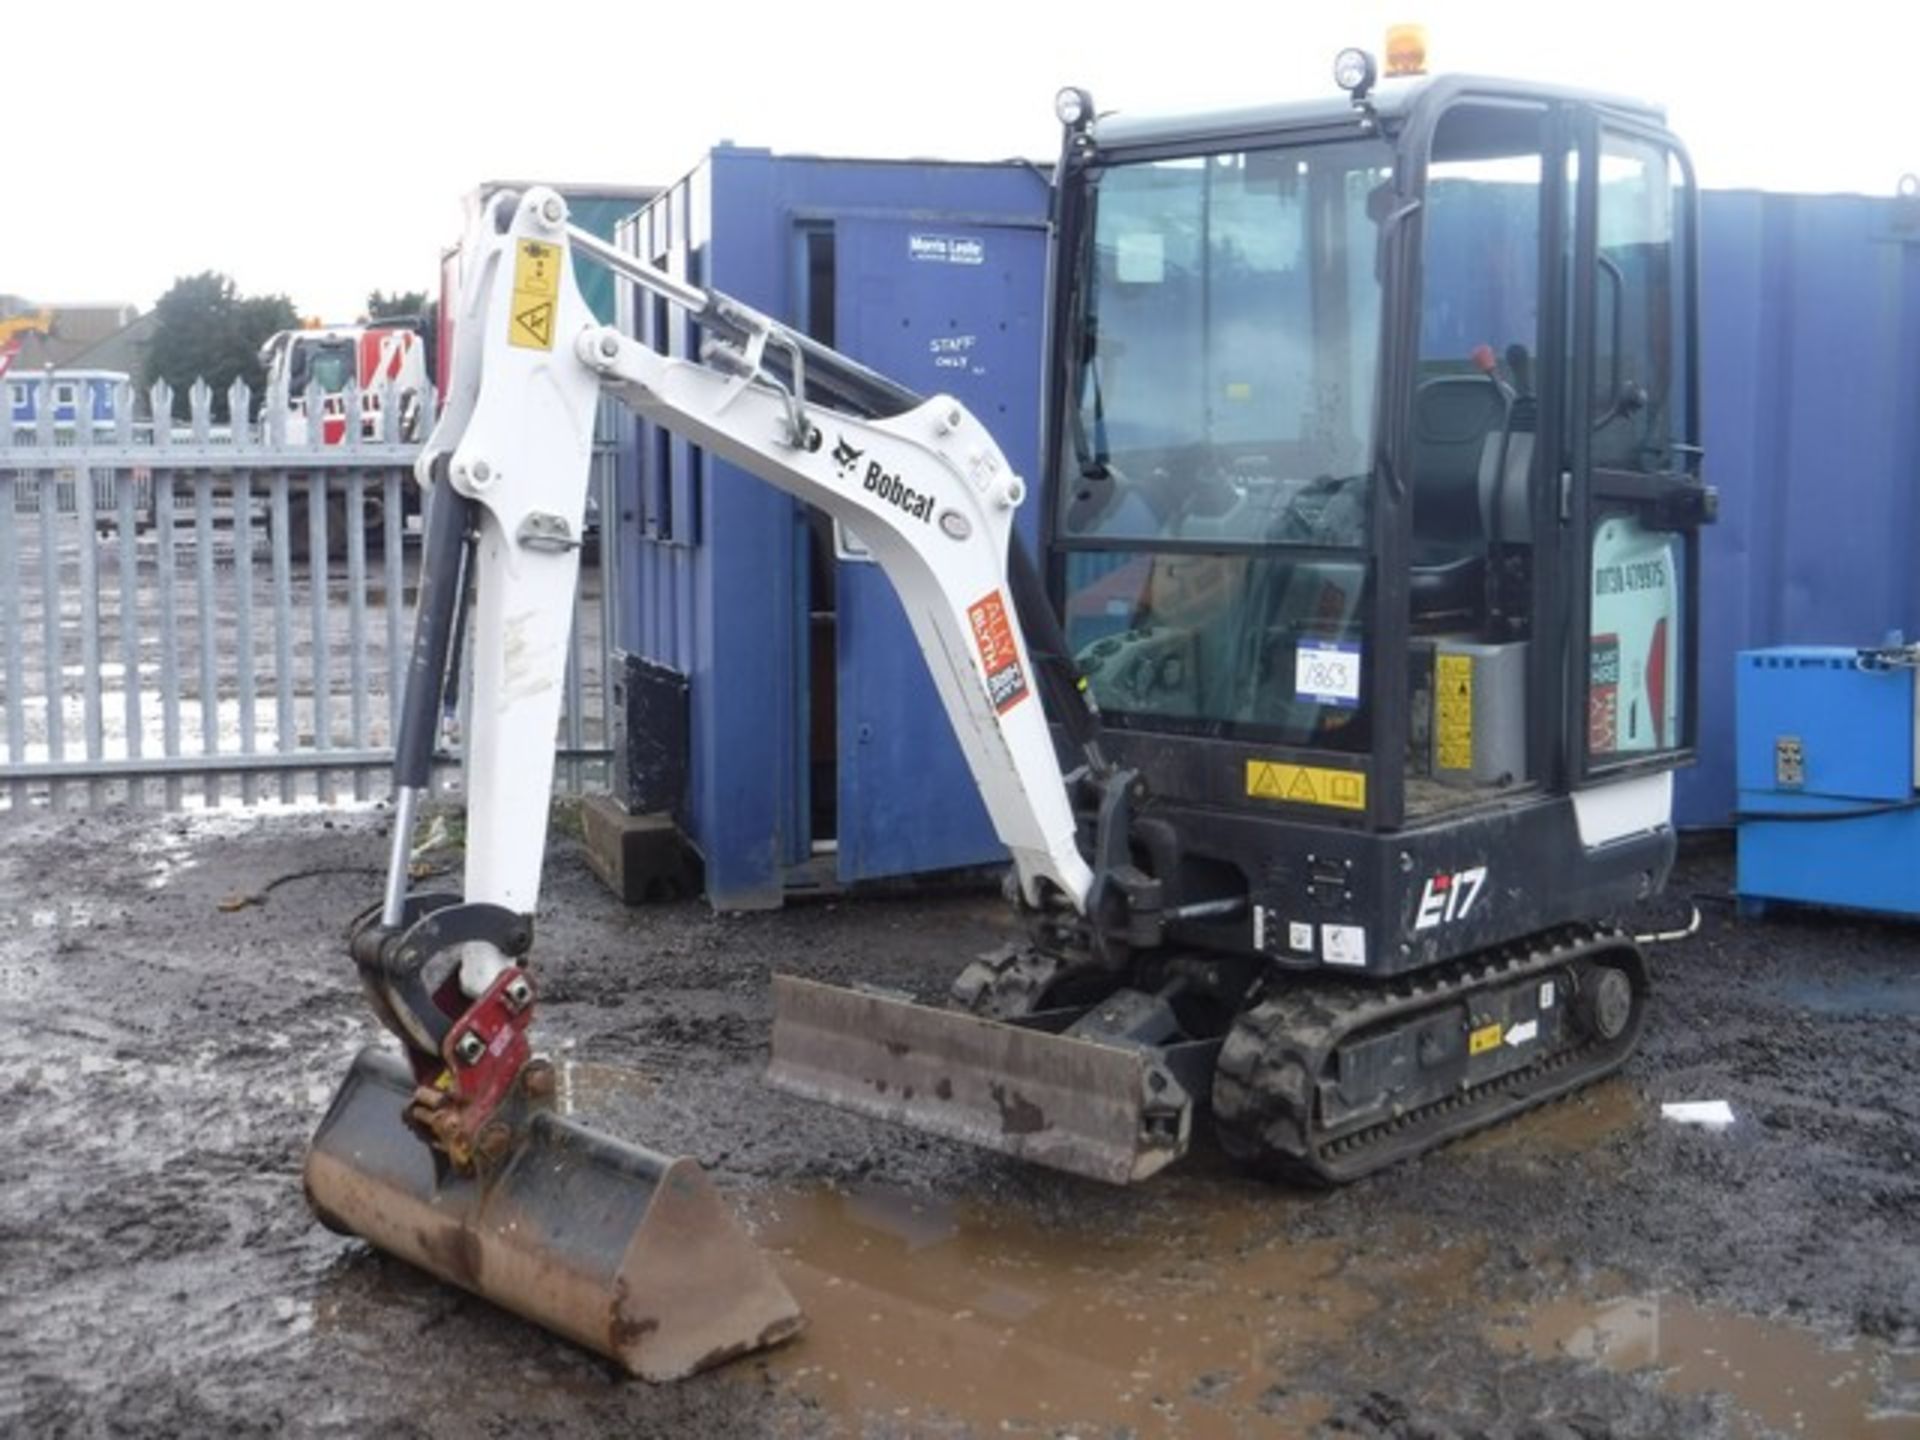 BOB CAT E17 - 2018 COMPACT EXCAVATOR WITH CAB 182 HRS (NOT VERIFIED) SN - 11001586